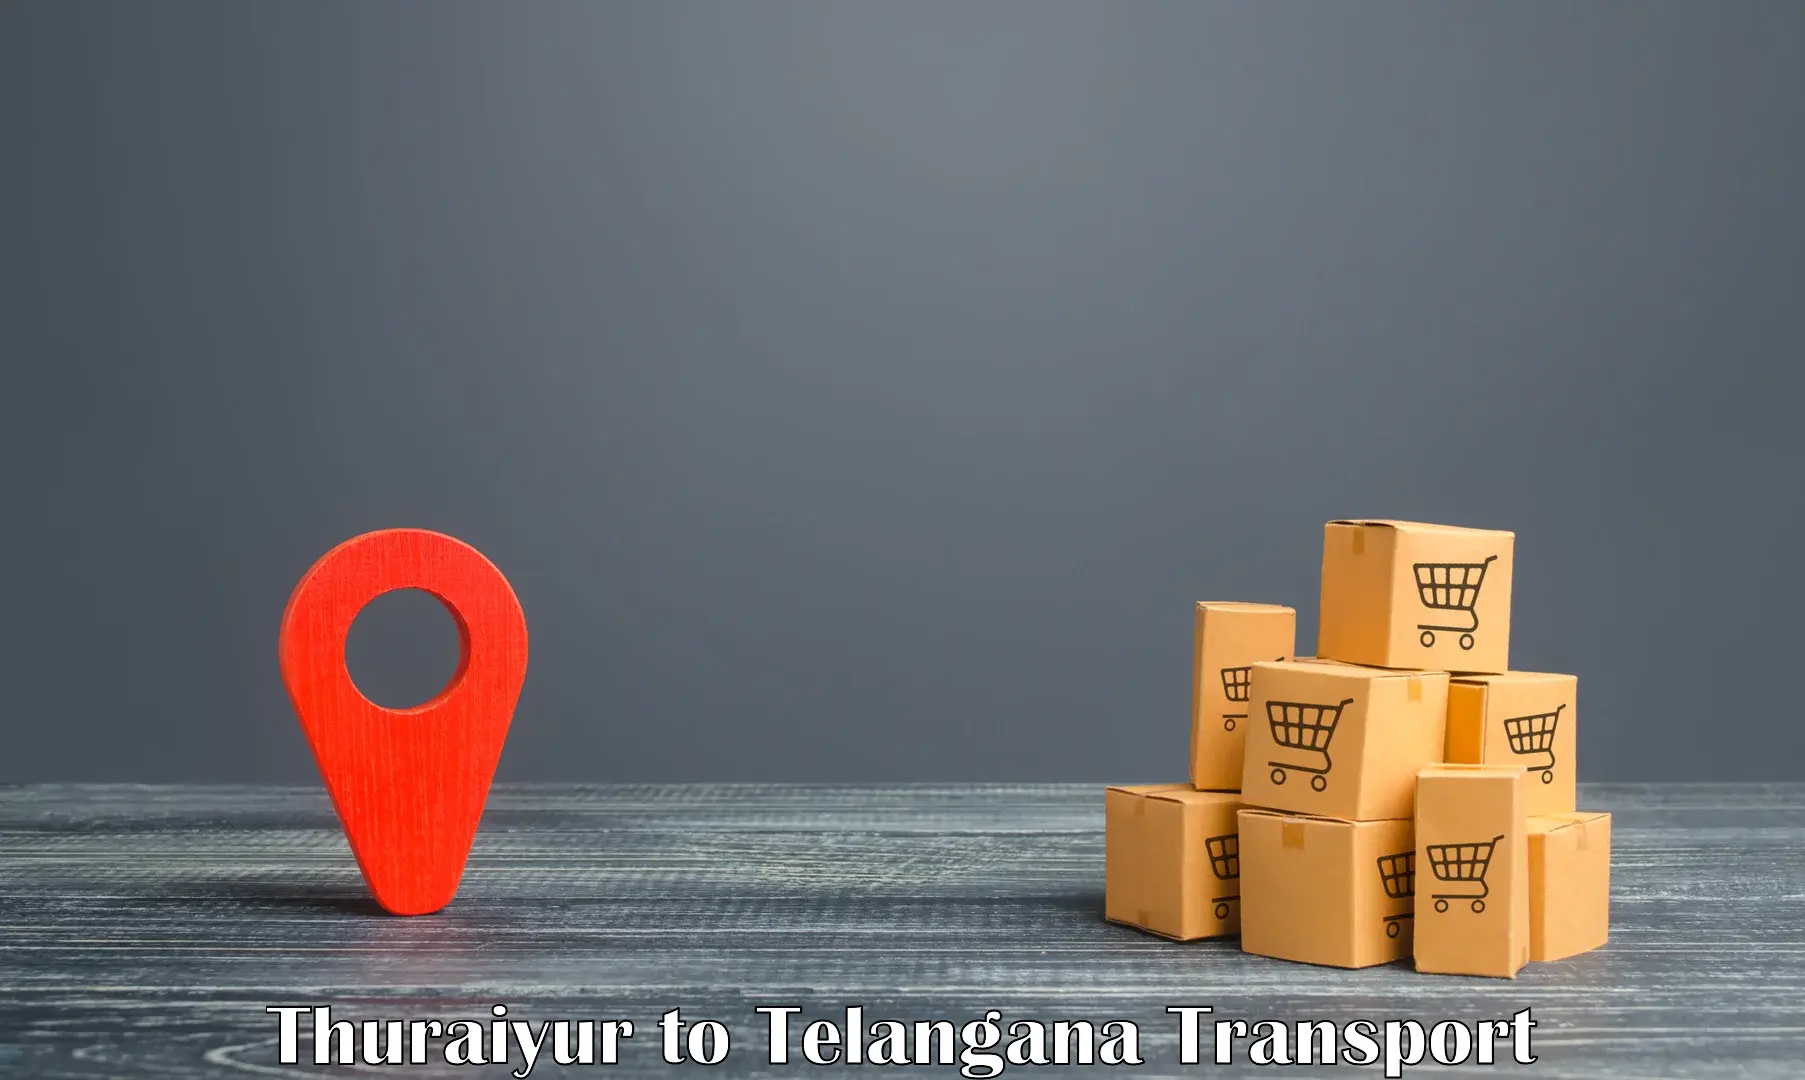 Furniture transport service in Thuraiyur to Mancherial